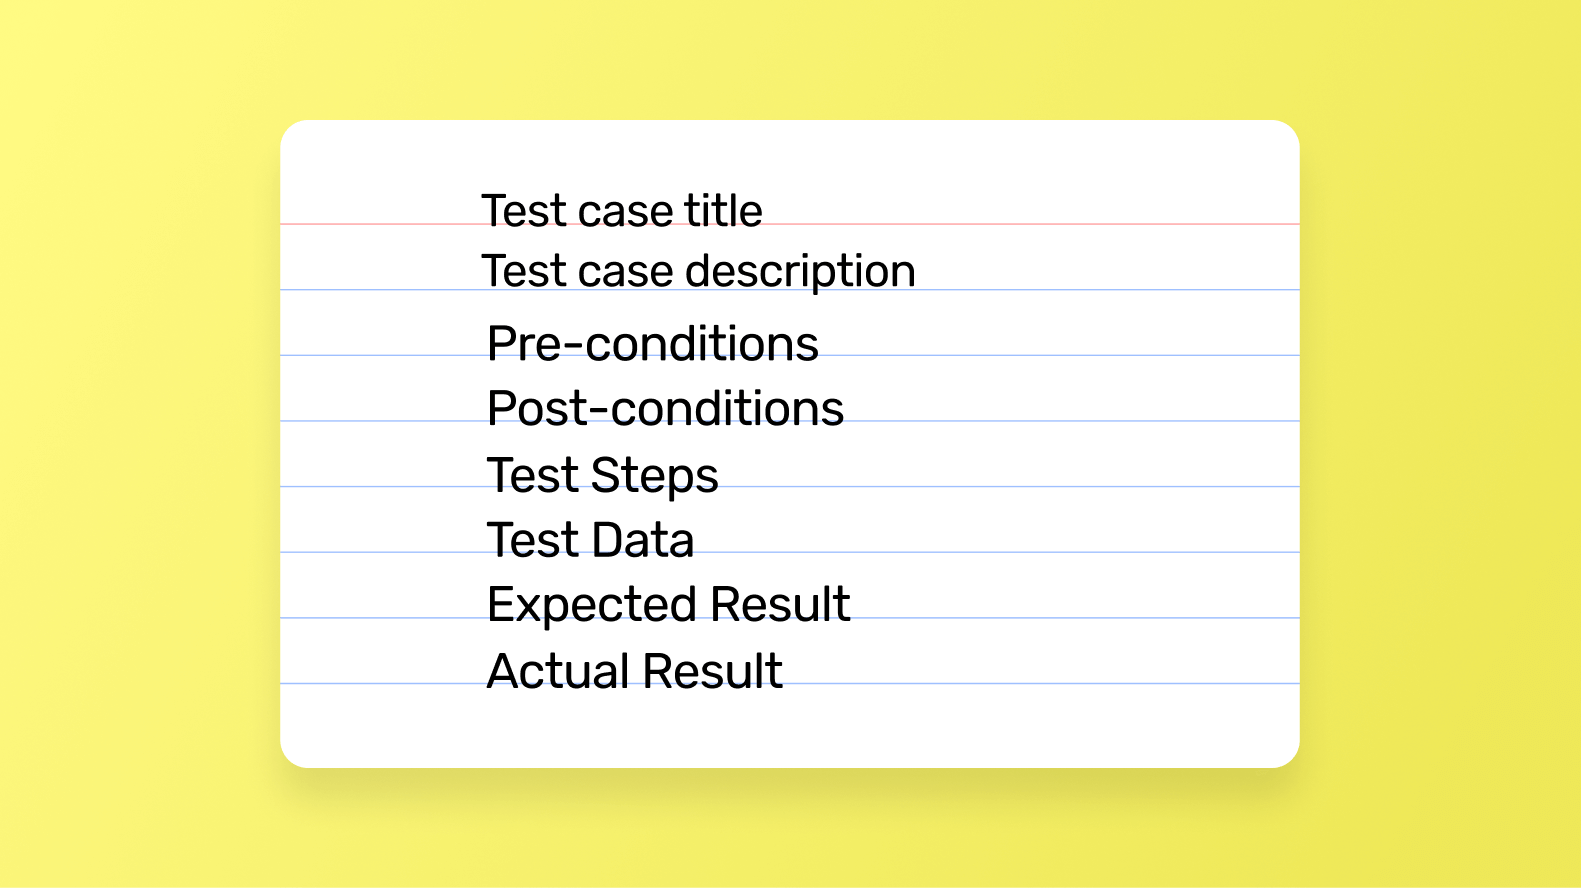 Components of a mobile app test cases including test case description, pre-conditions, post-conditioned, test steps, test data, expected results, and actual results.